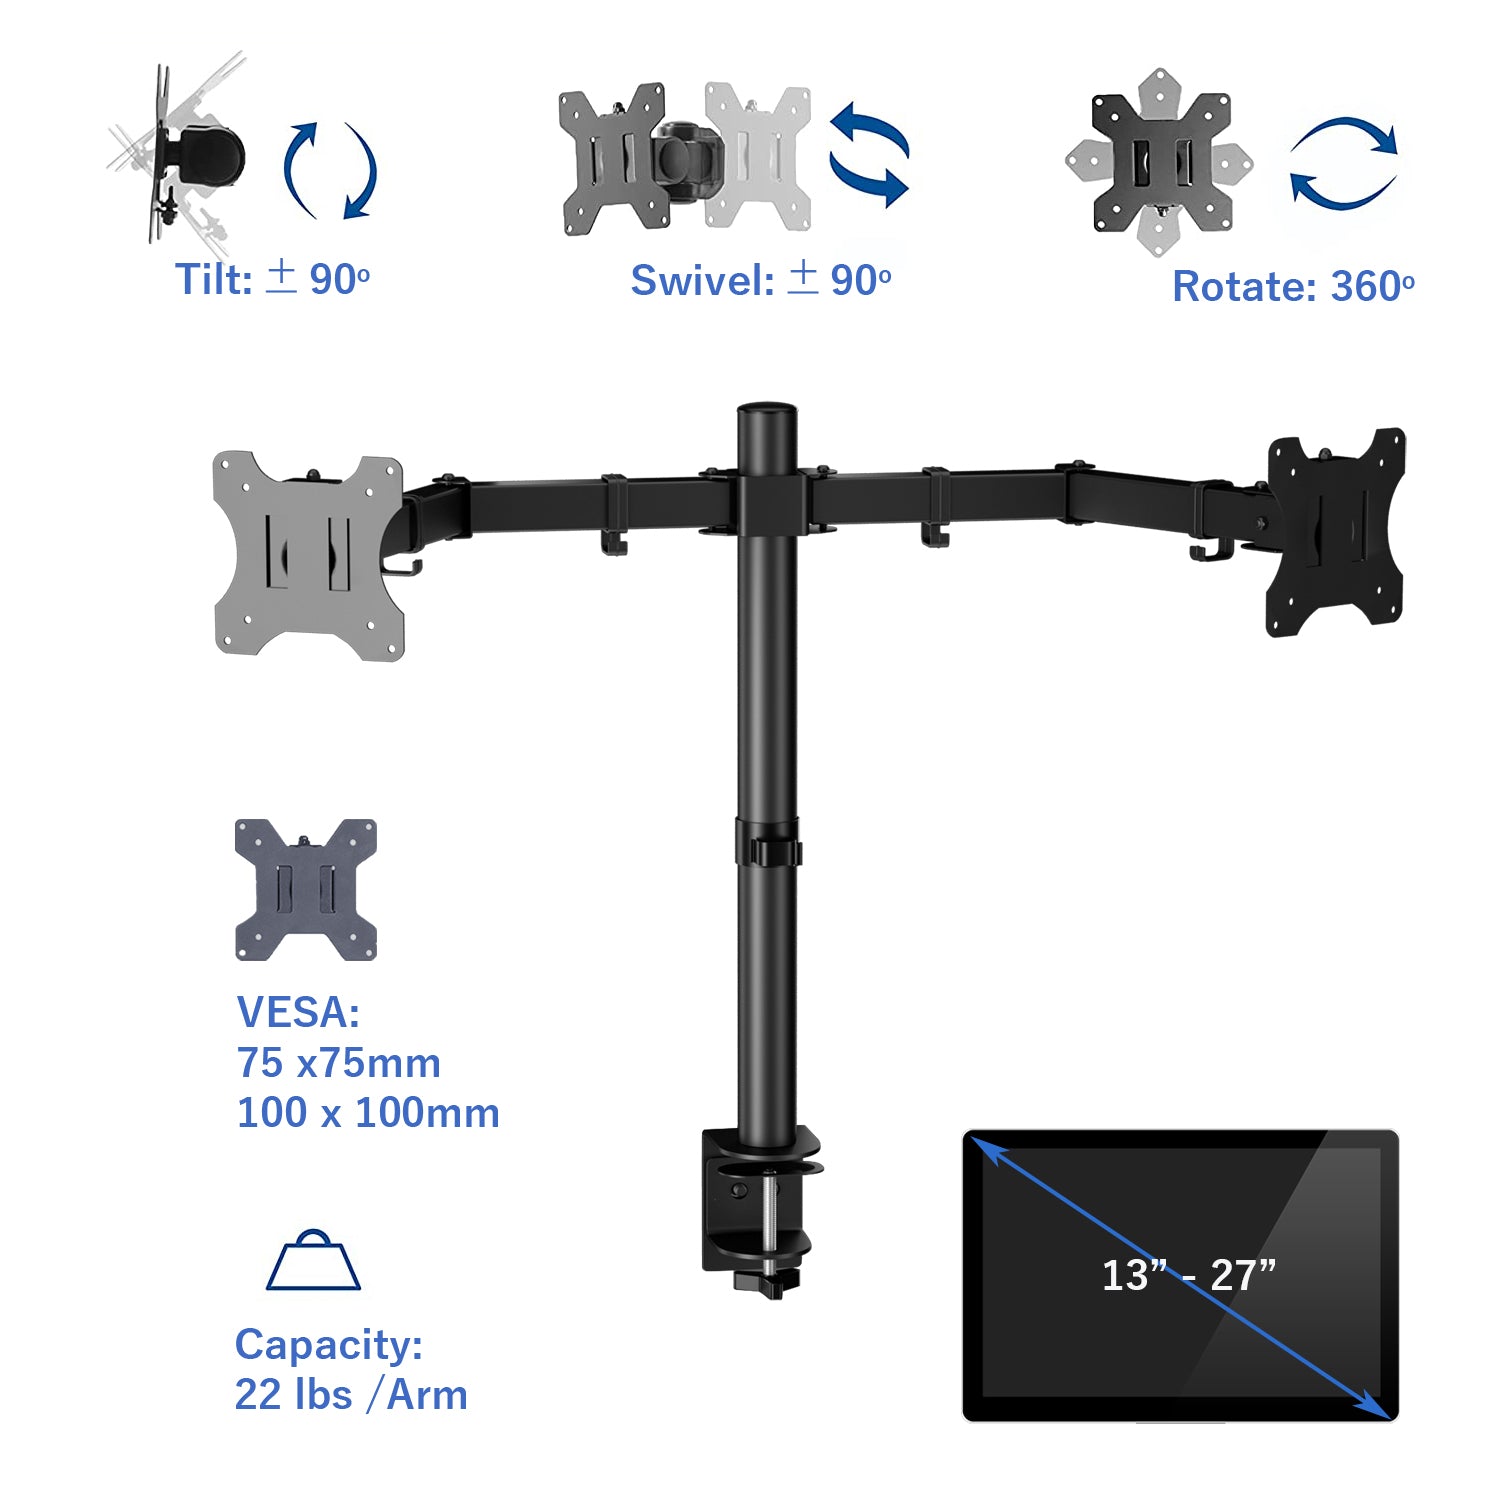 Aeons Dual Monitor Desk Mount, Adjustable Dual Arm fits 27 inch Screen with VESA, Clamp and Cable Management, Black